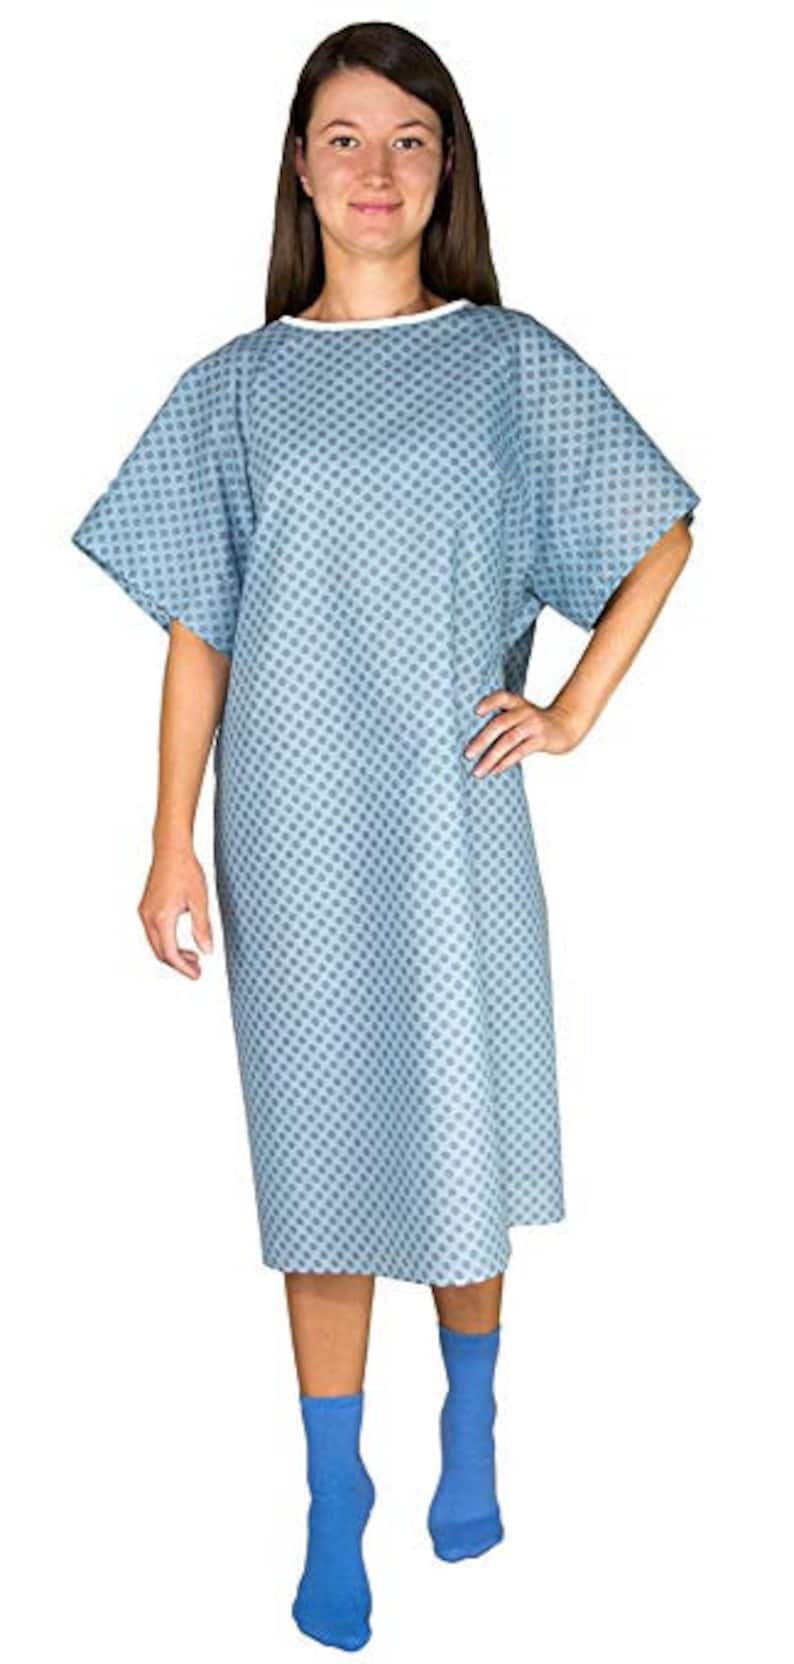 3 Pack Blue Hospital Gown with Back Tie/Hospital Patient Gown with Ties One Size Fits All image 1